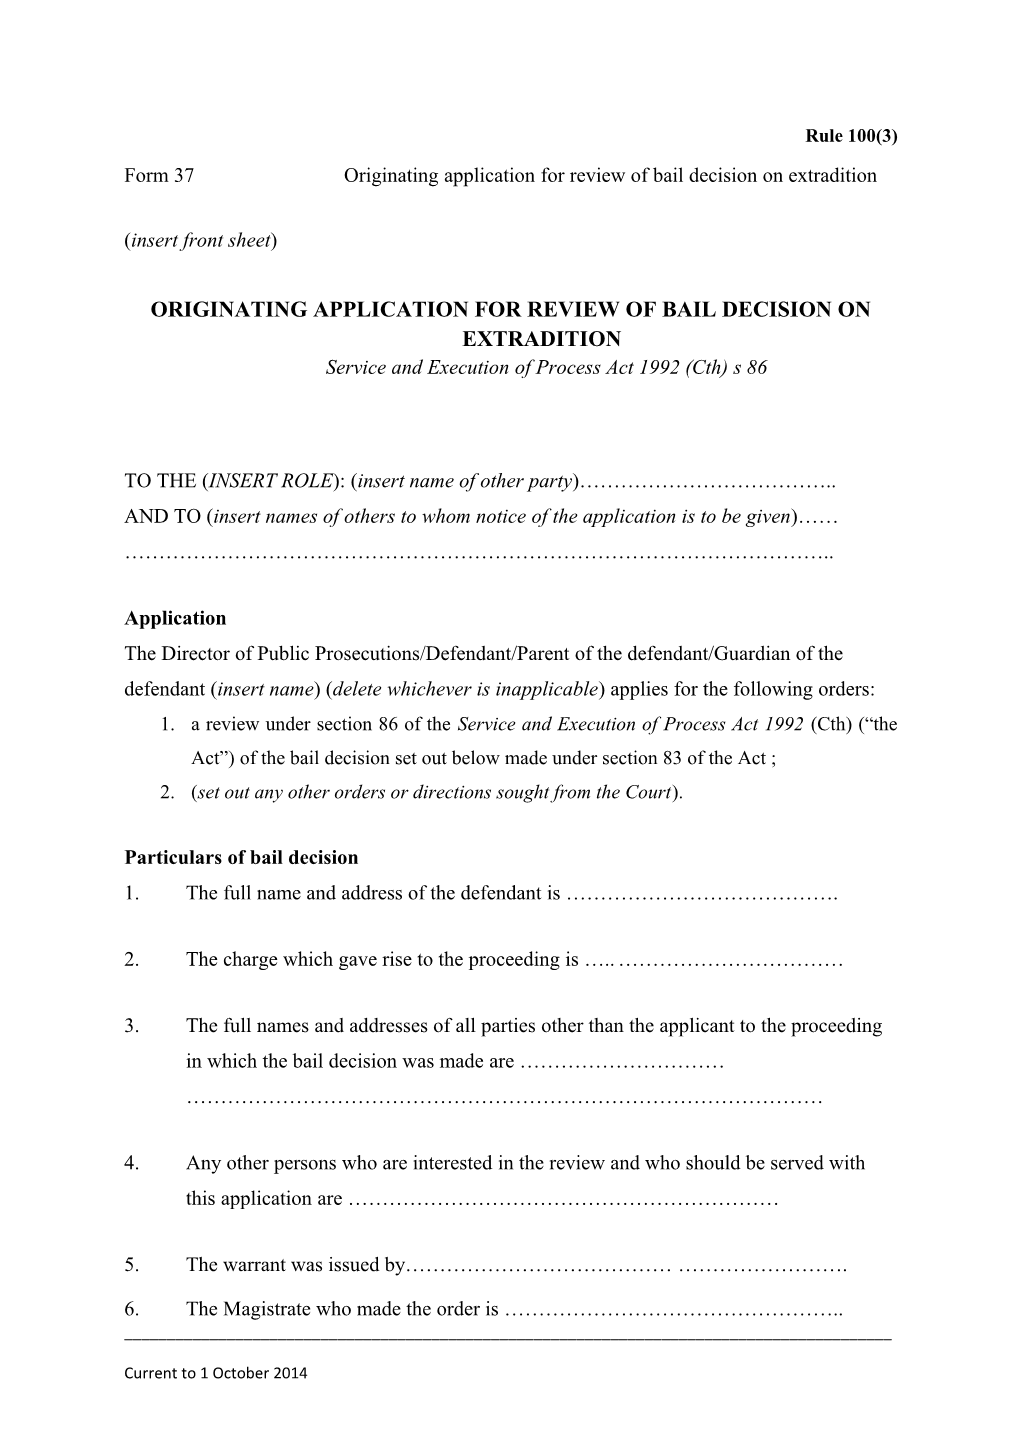 Form 37 - Originating Application for Review of Bail Decision on Extradition